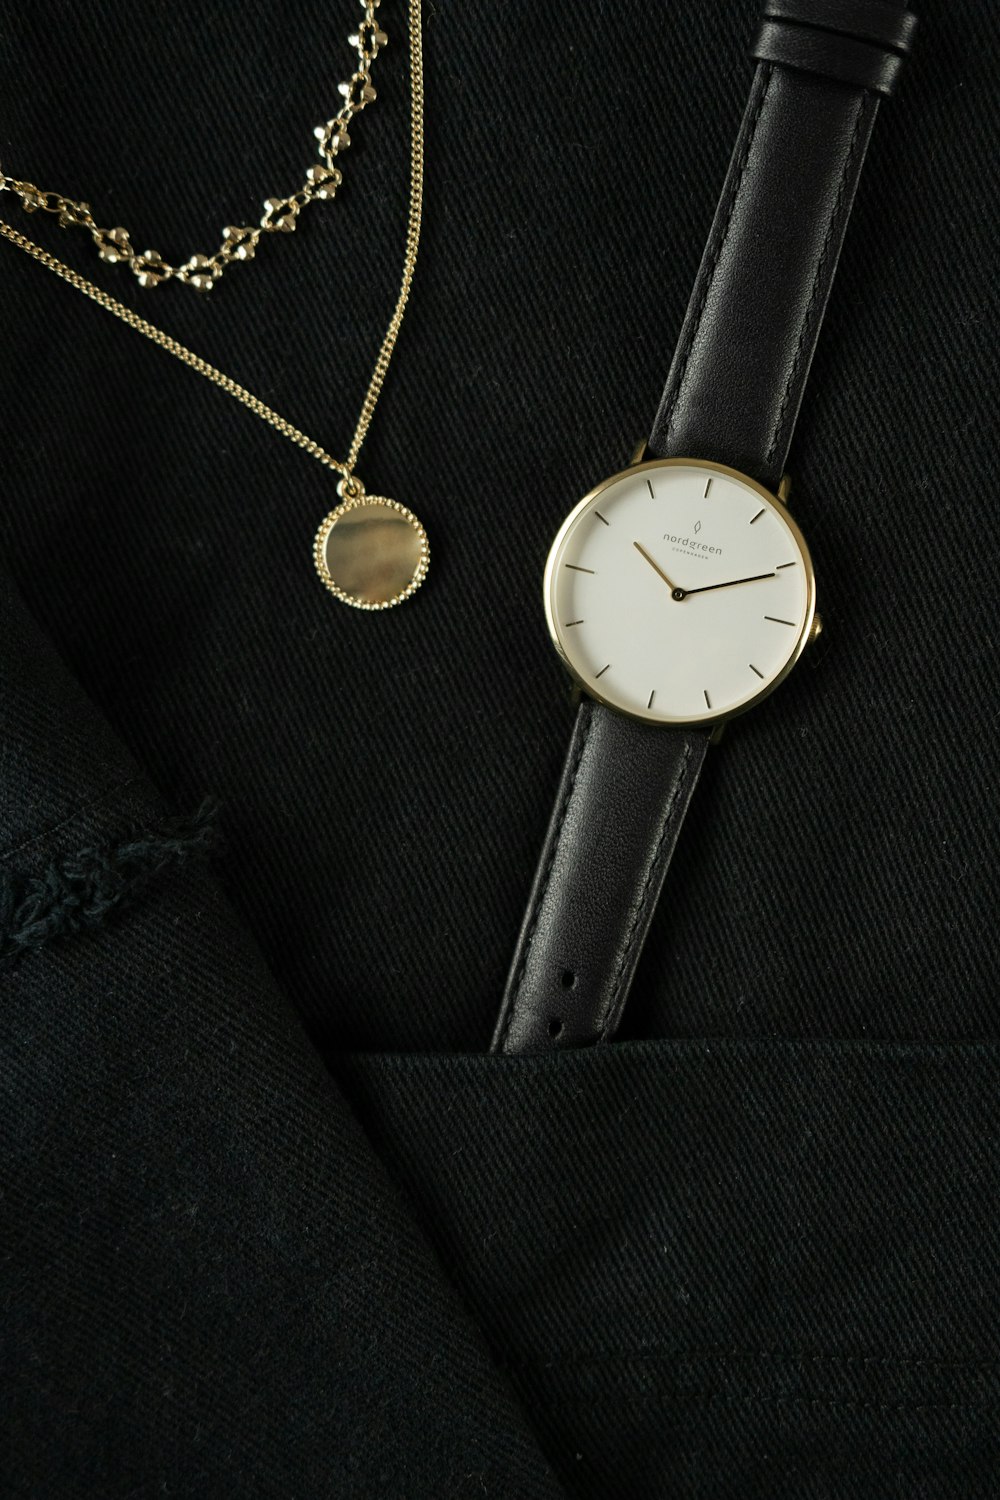 round gold-colored analog watch with black leather strap